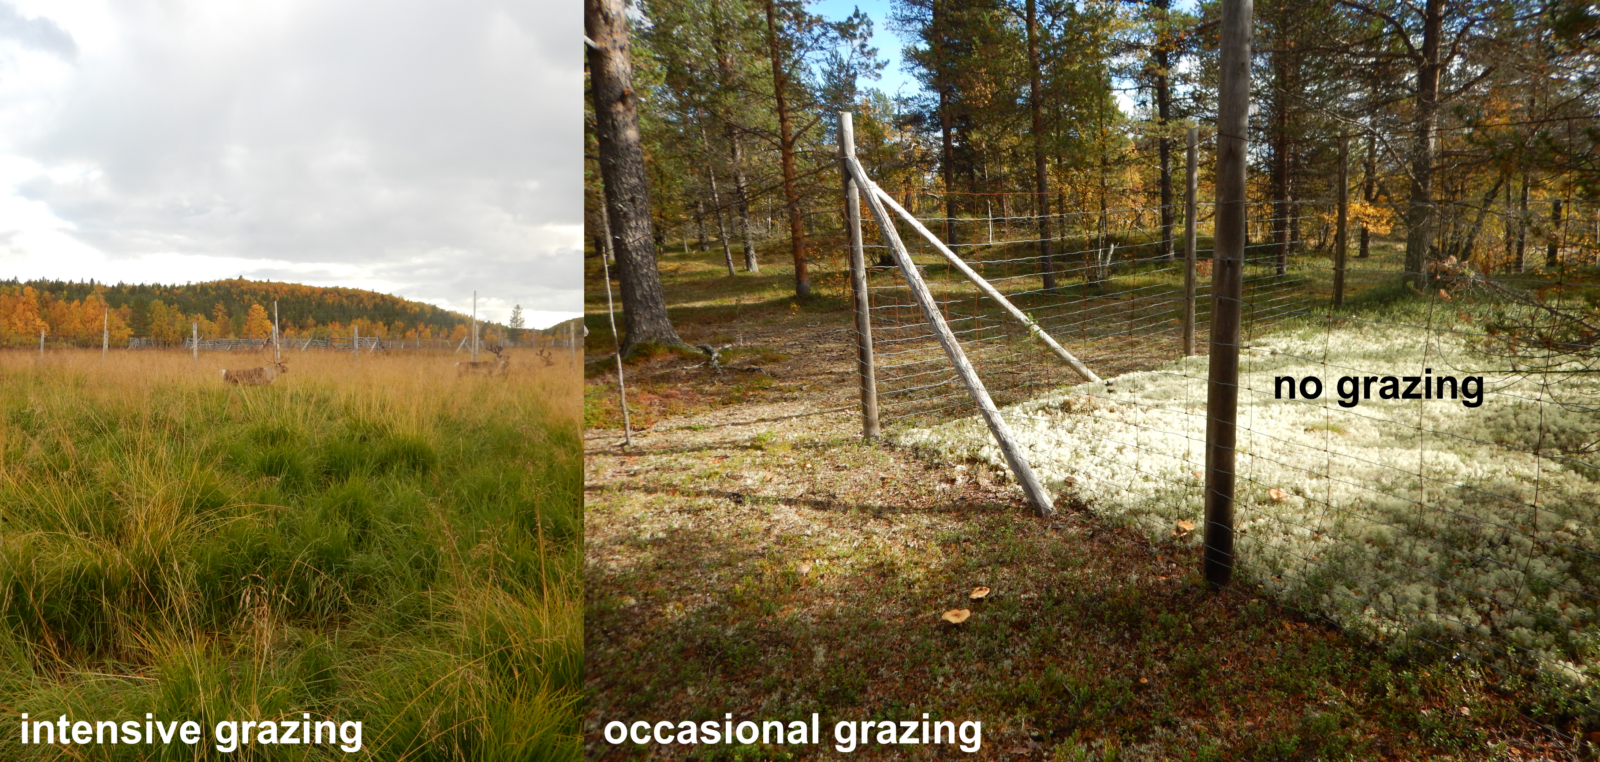 Two photos showing lush vegetation where intensive grazing took place and a grazing exclosure on the other photo, with seemingly browner ground where grazing was possible.